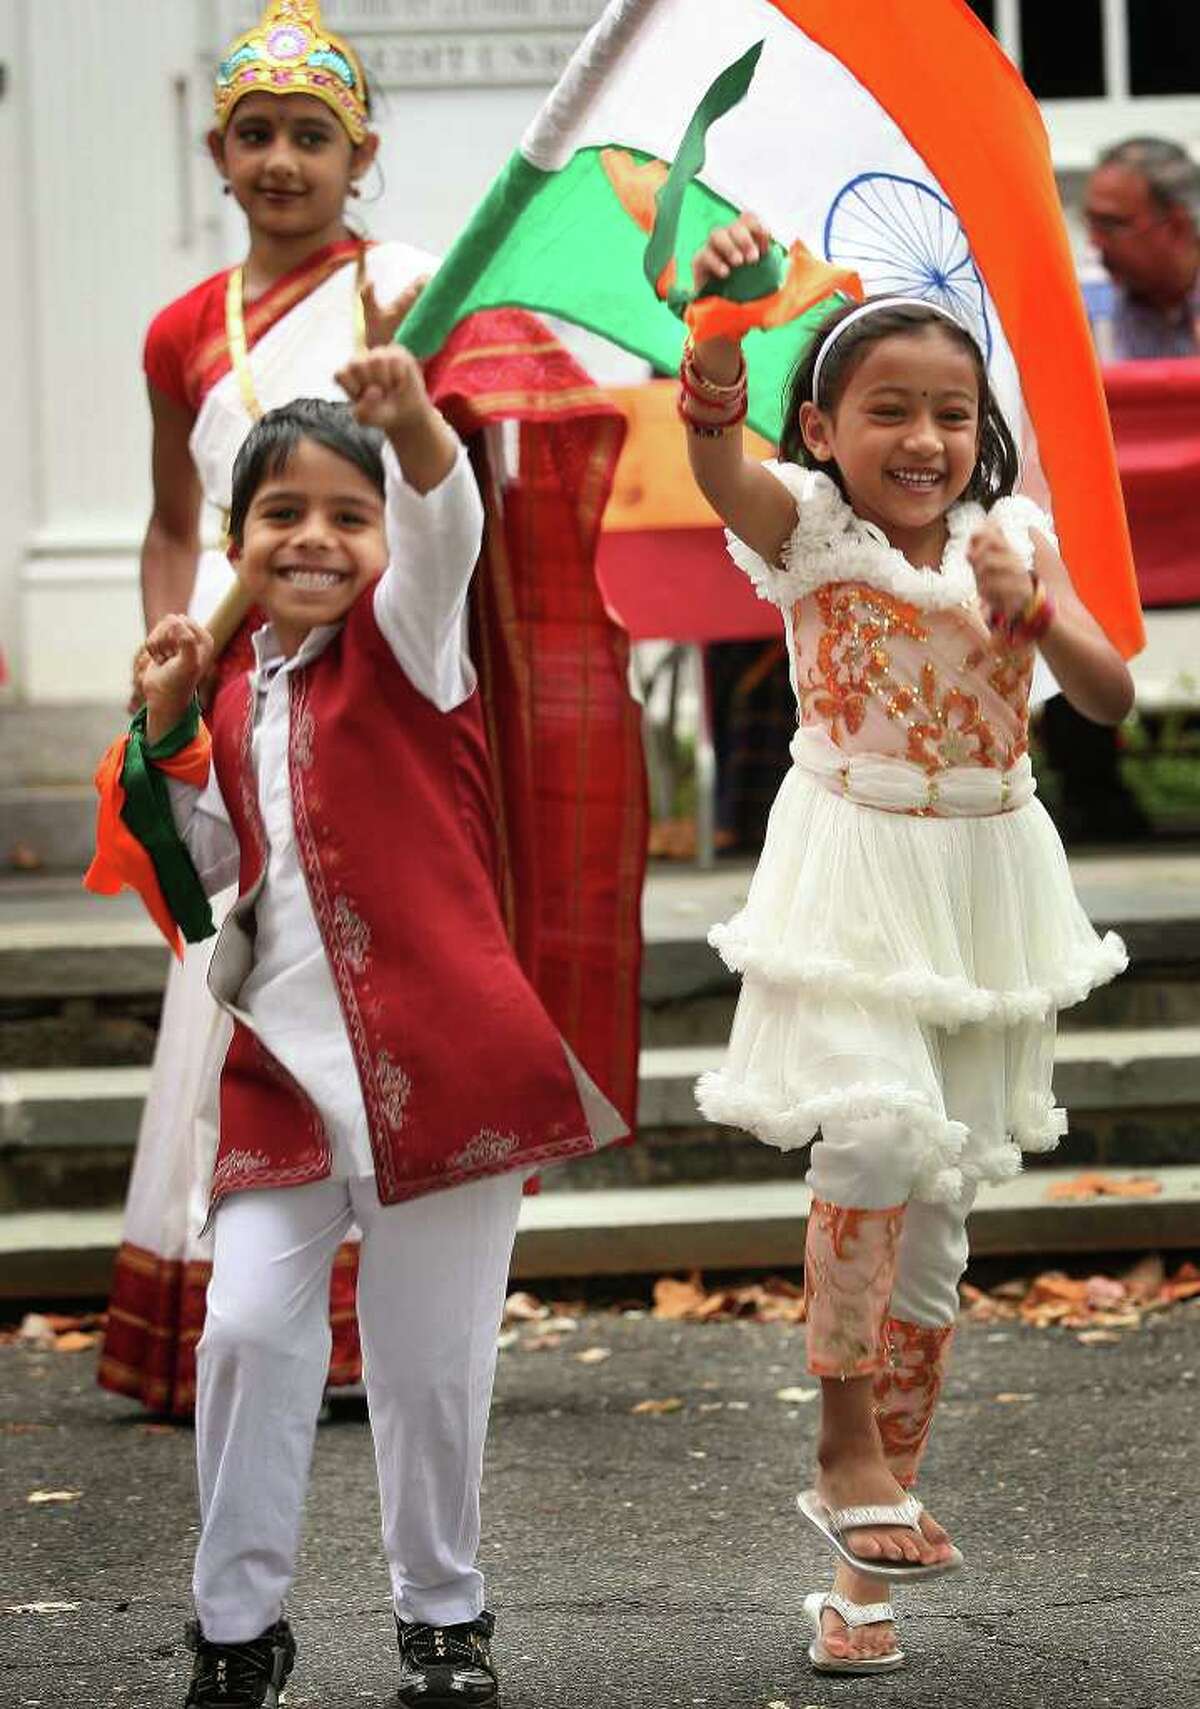 Shiva Subramanian, 5 of Trumbull, and Aarushi Agarwal, 4 of Norwalk, dance at the Hindu Cultural Center of Connecticut's annual Heritage India Festival on the Town Hall Green in Fairfield on Sunday, September 28, 2010. Behind is Shreya Chopra, 10 of Trumbull, dressed as Mother India.